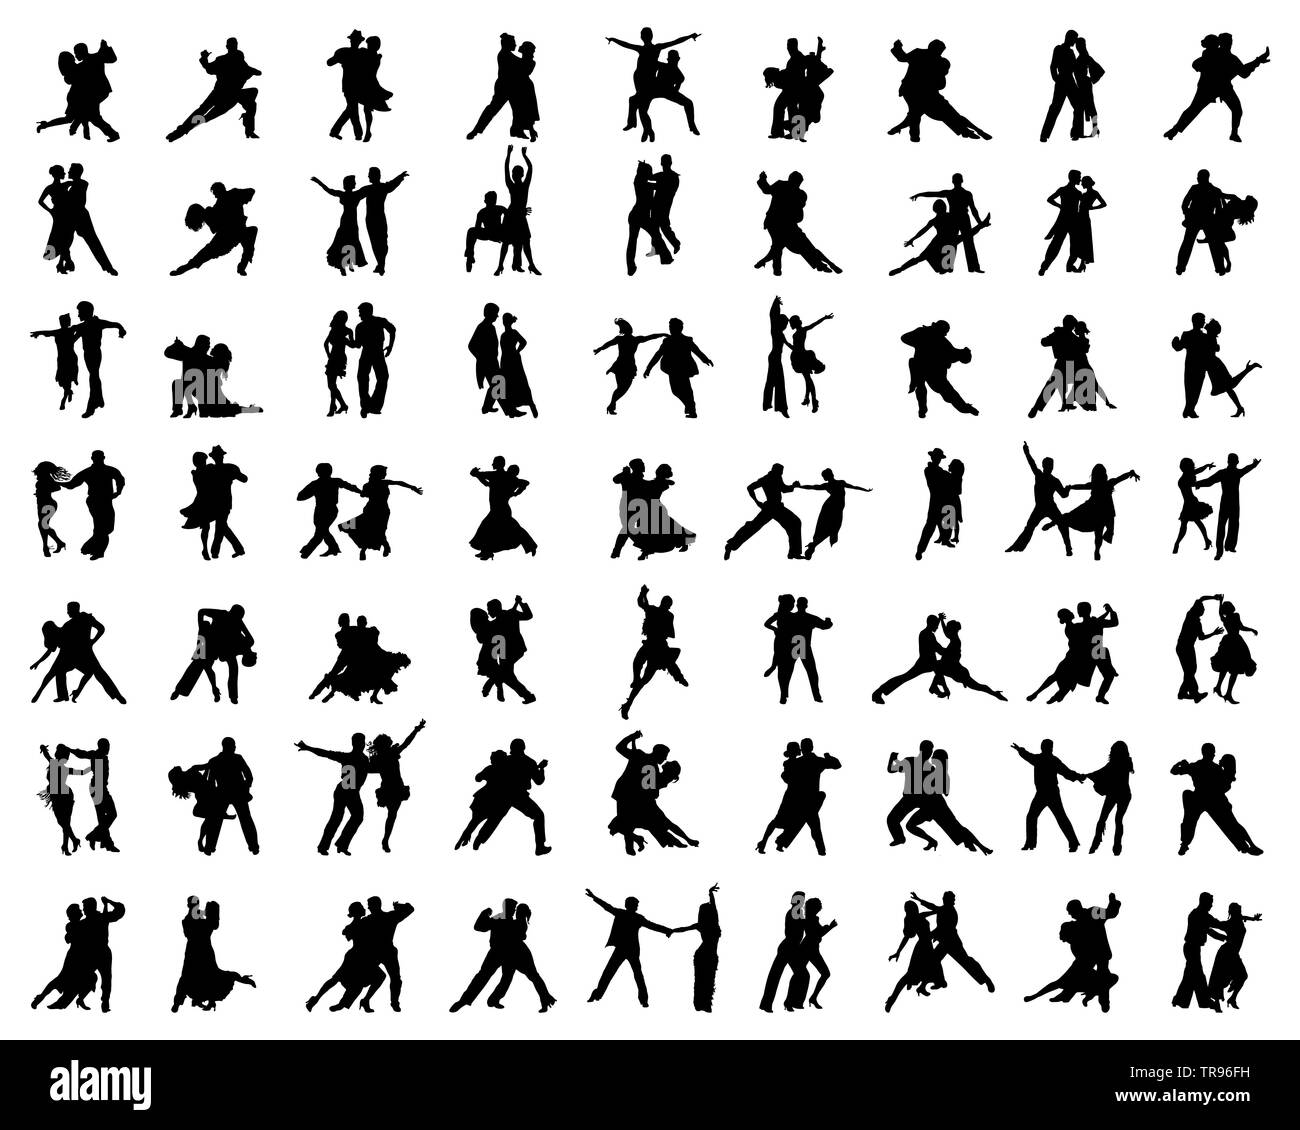 Black silhouettes of dance players on a white background Stock Photo